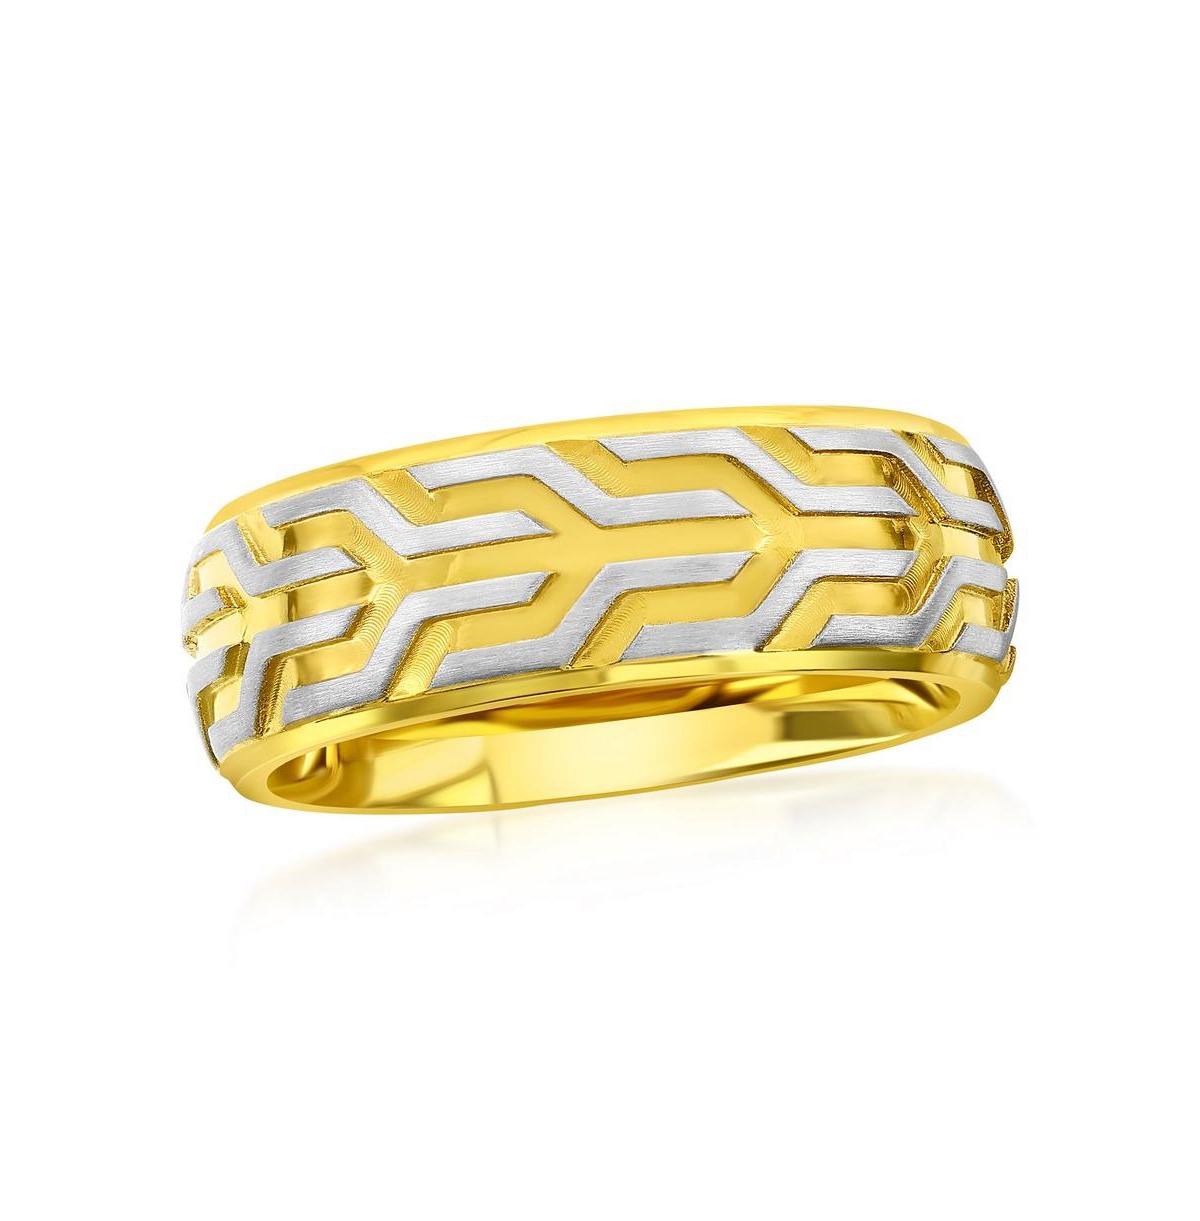 Stainless Steel Gold and Silver Designed Ring - Gold and silver